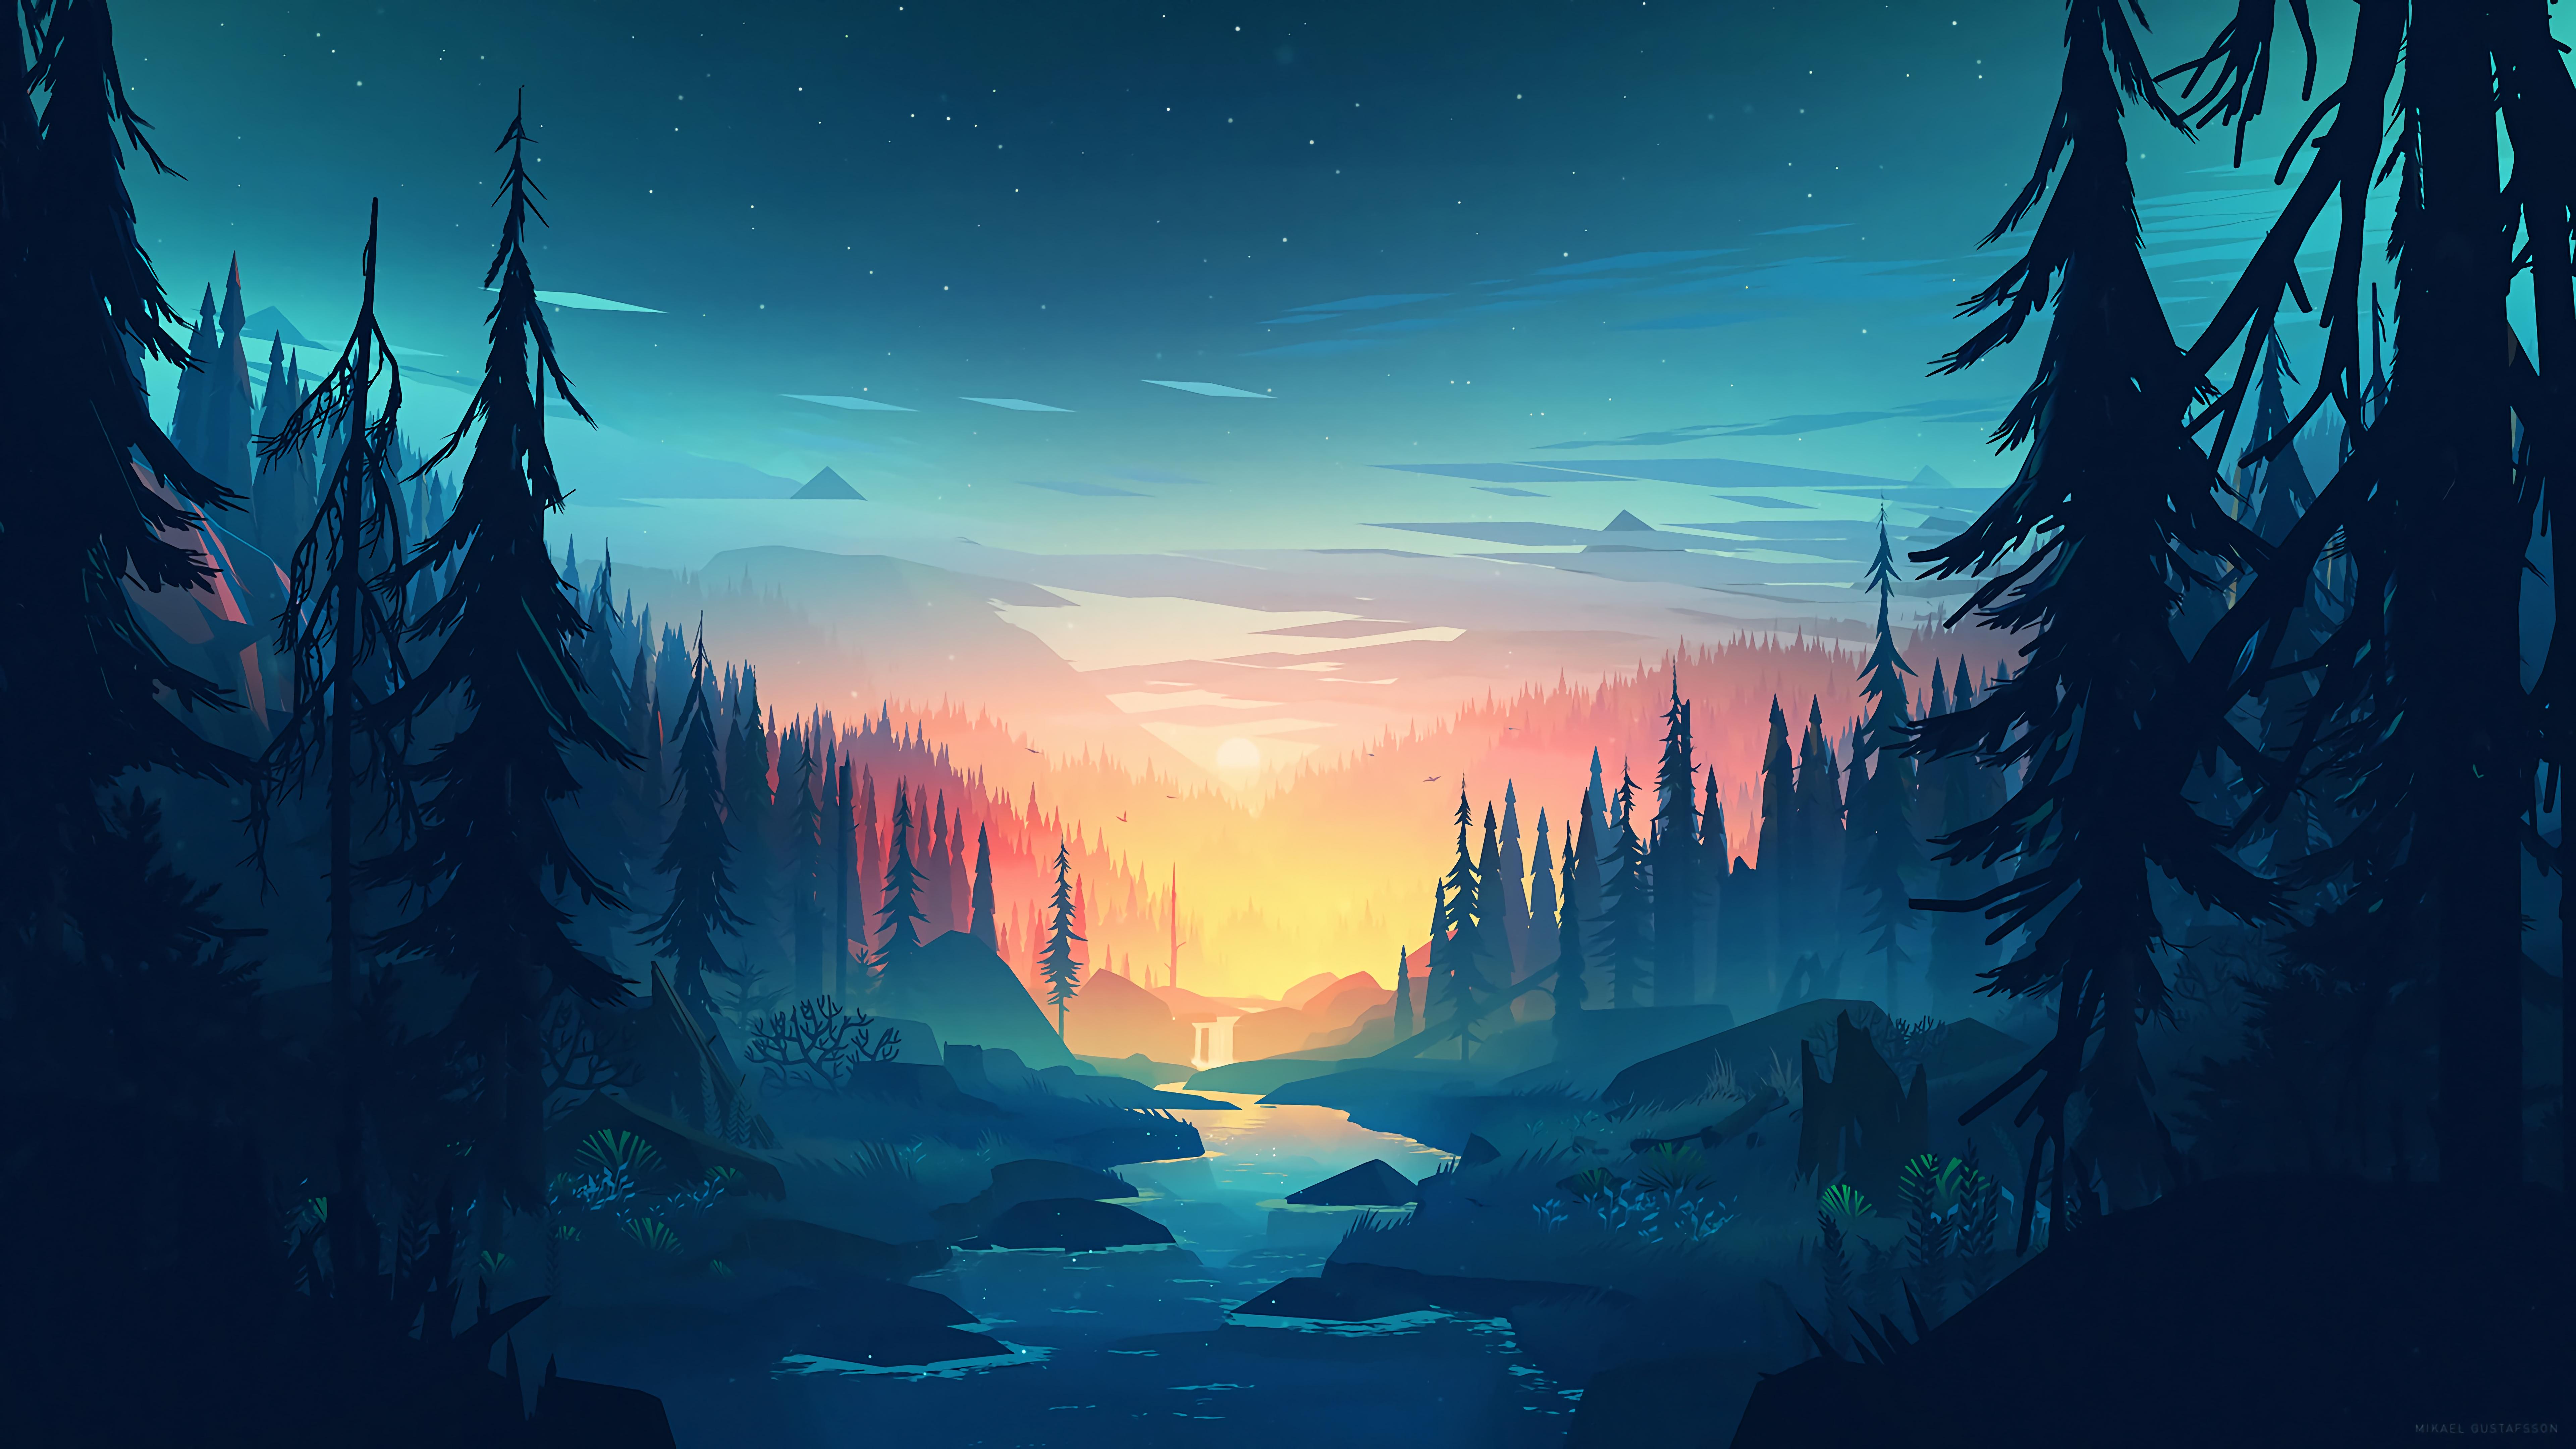 River Mountains [7680x4320] : MinimalWallpapers